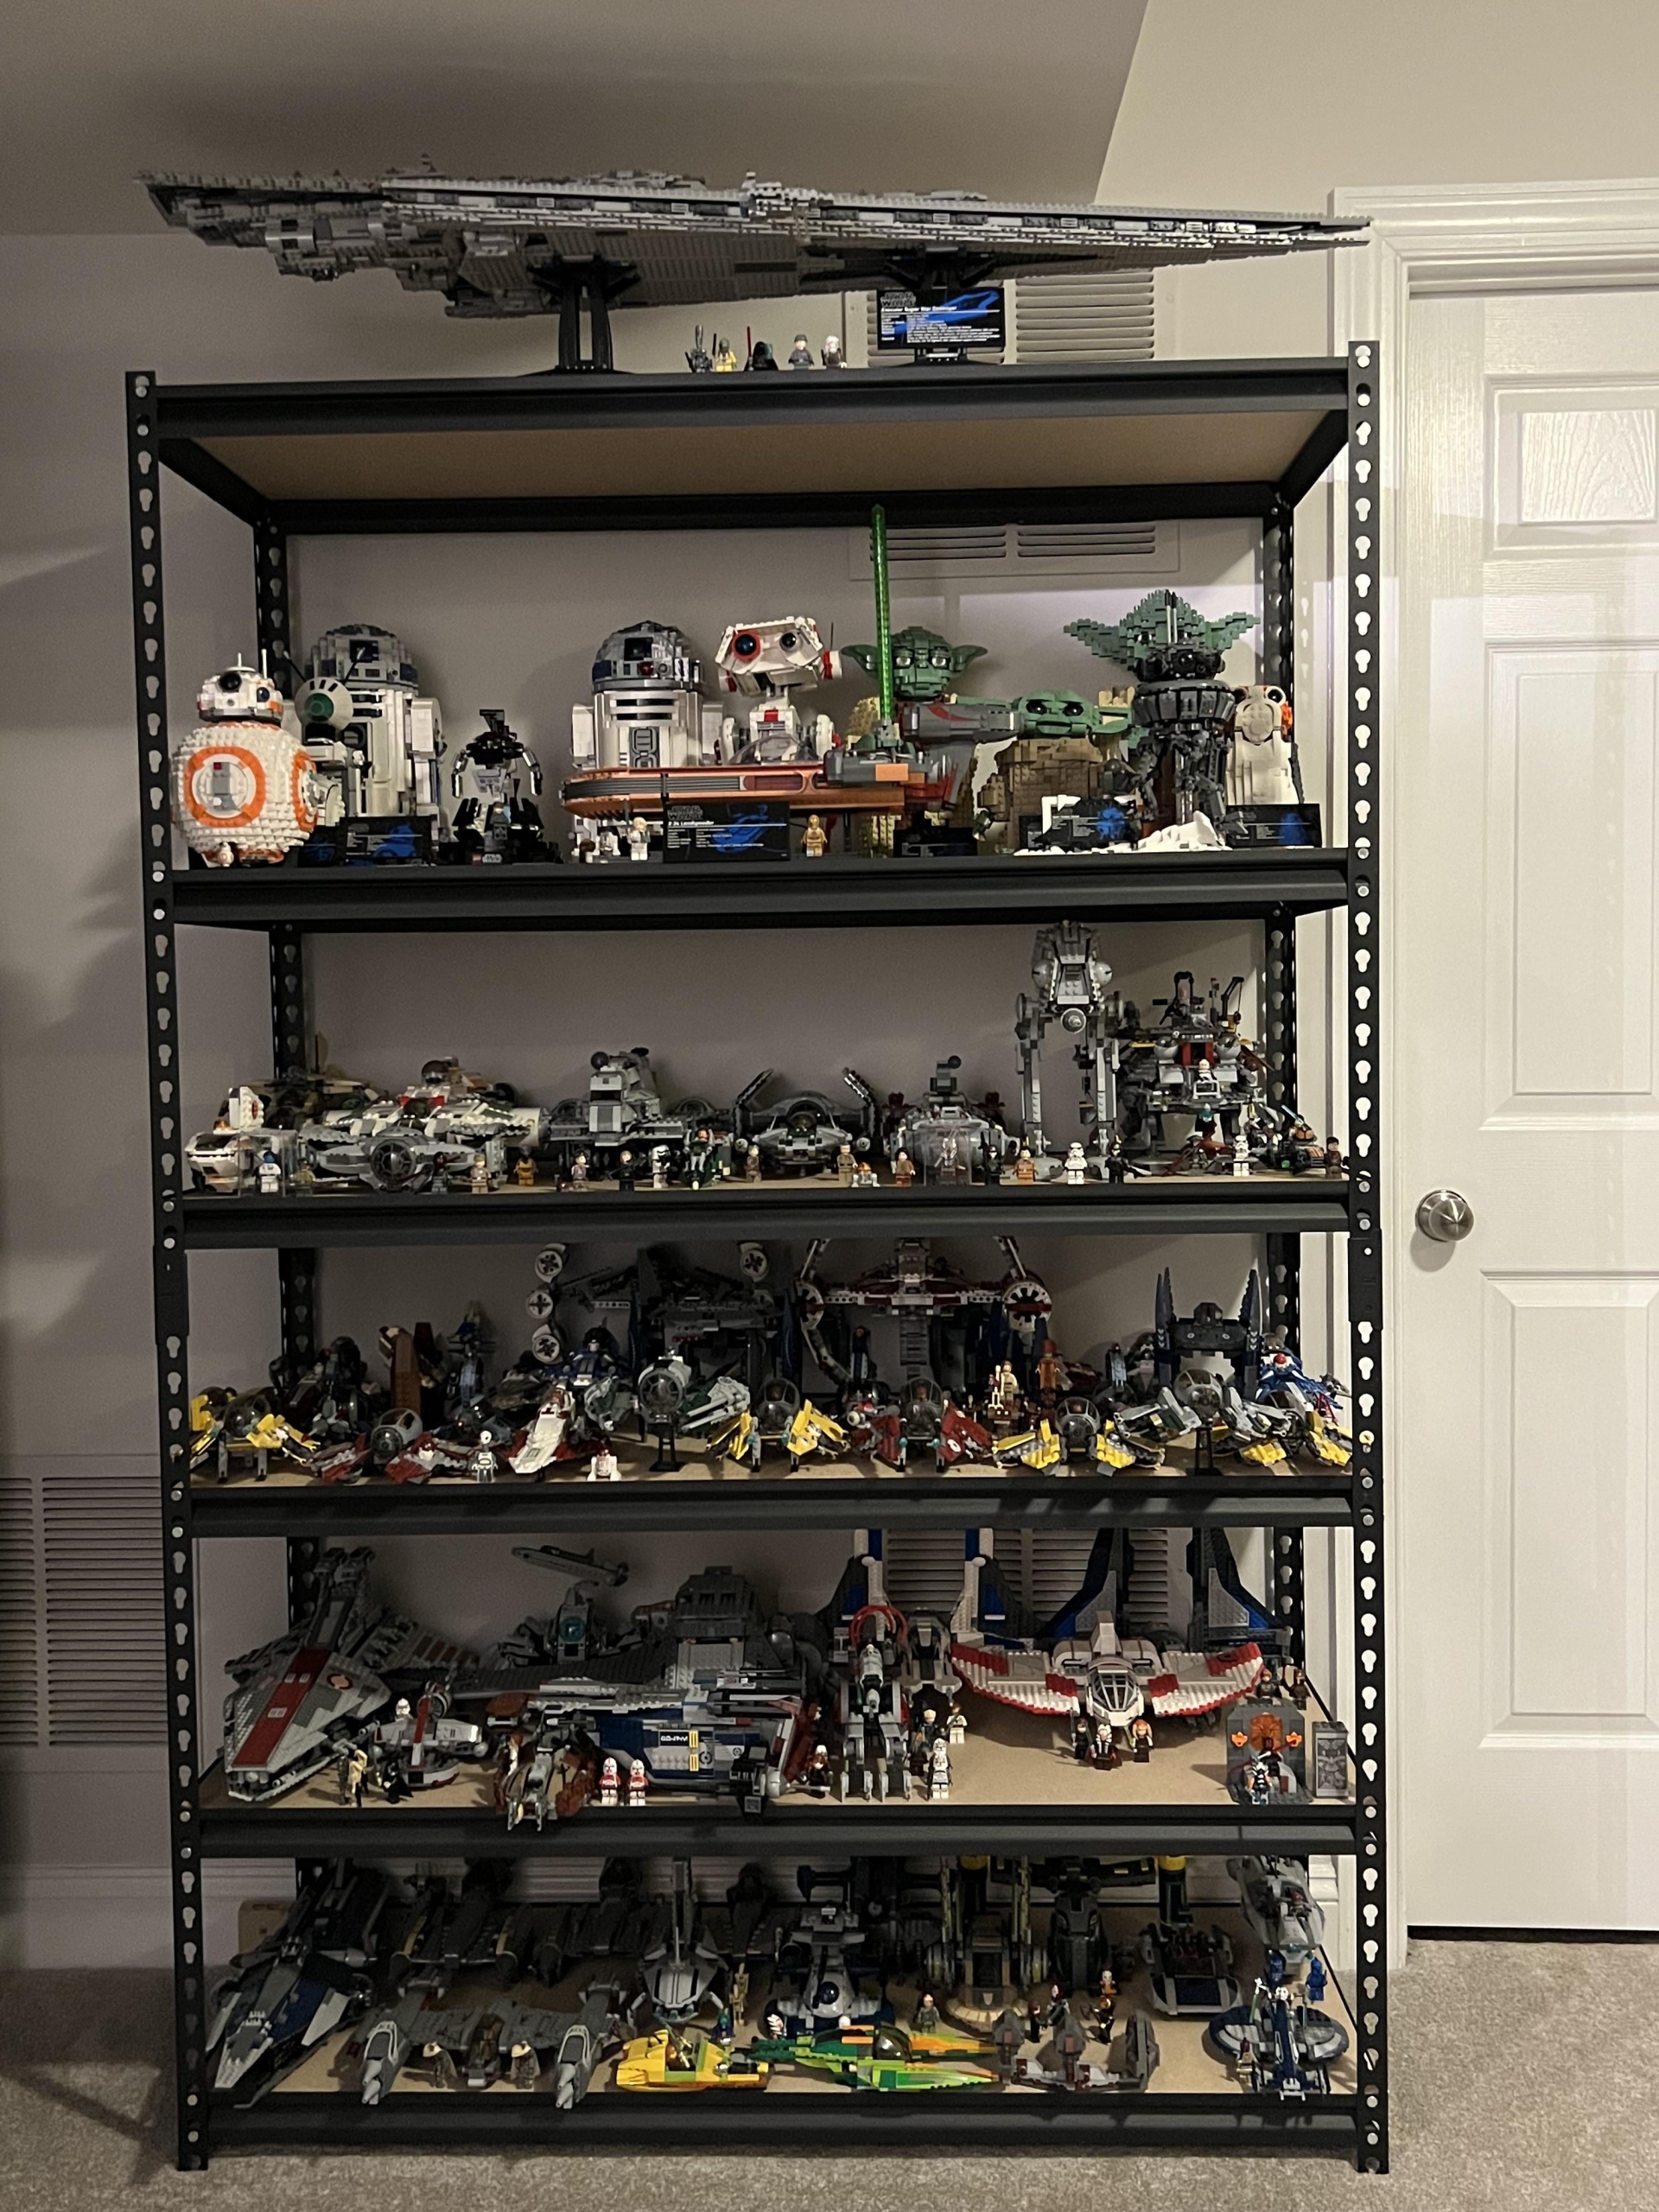 This is what a complete LEGO Star Wars collection looks like